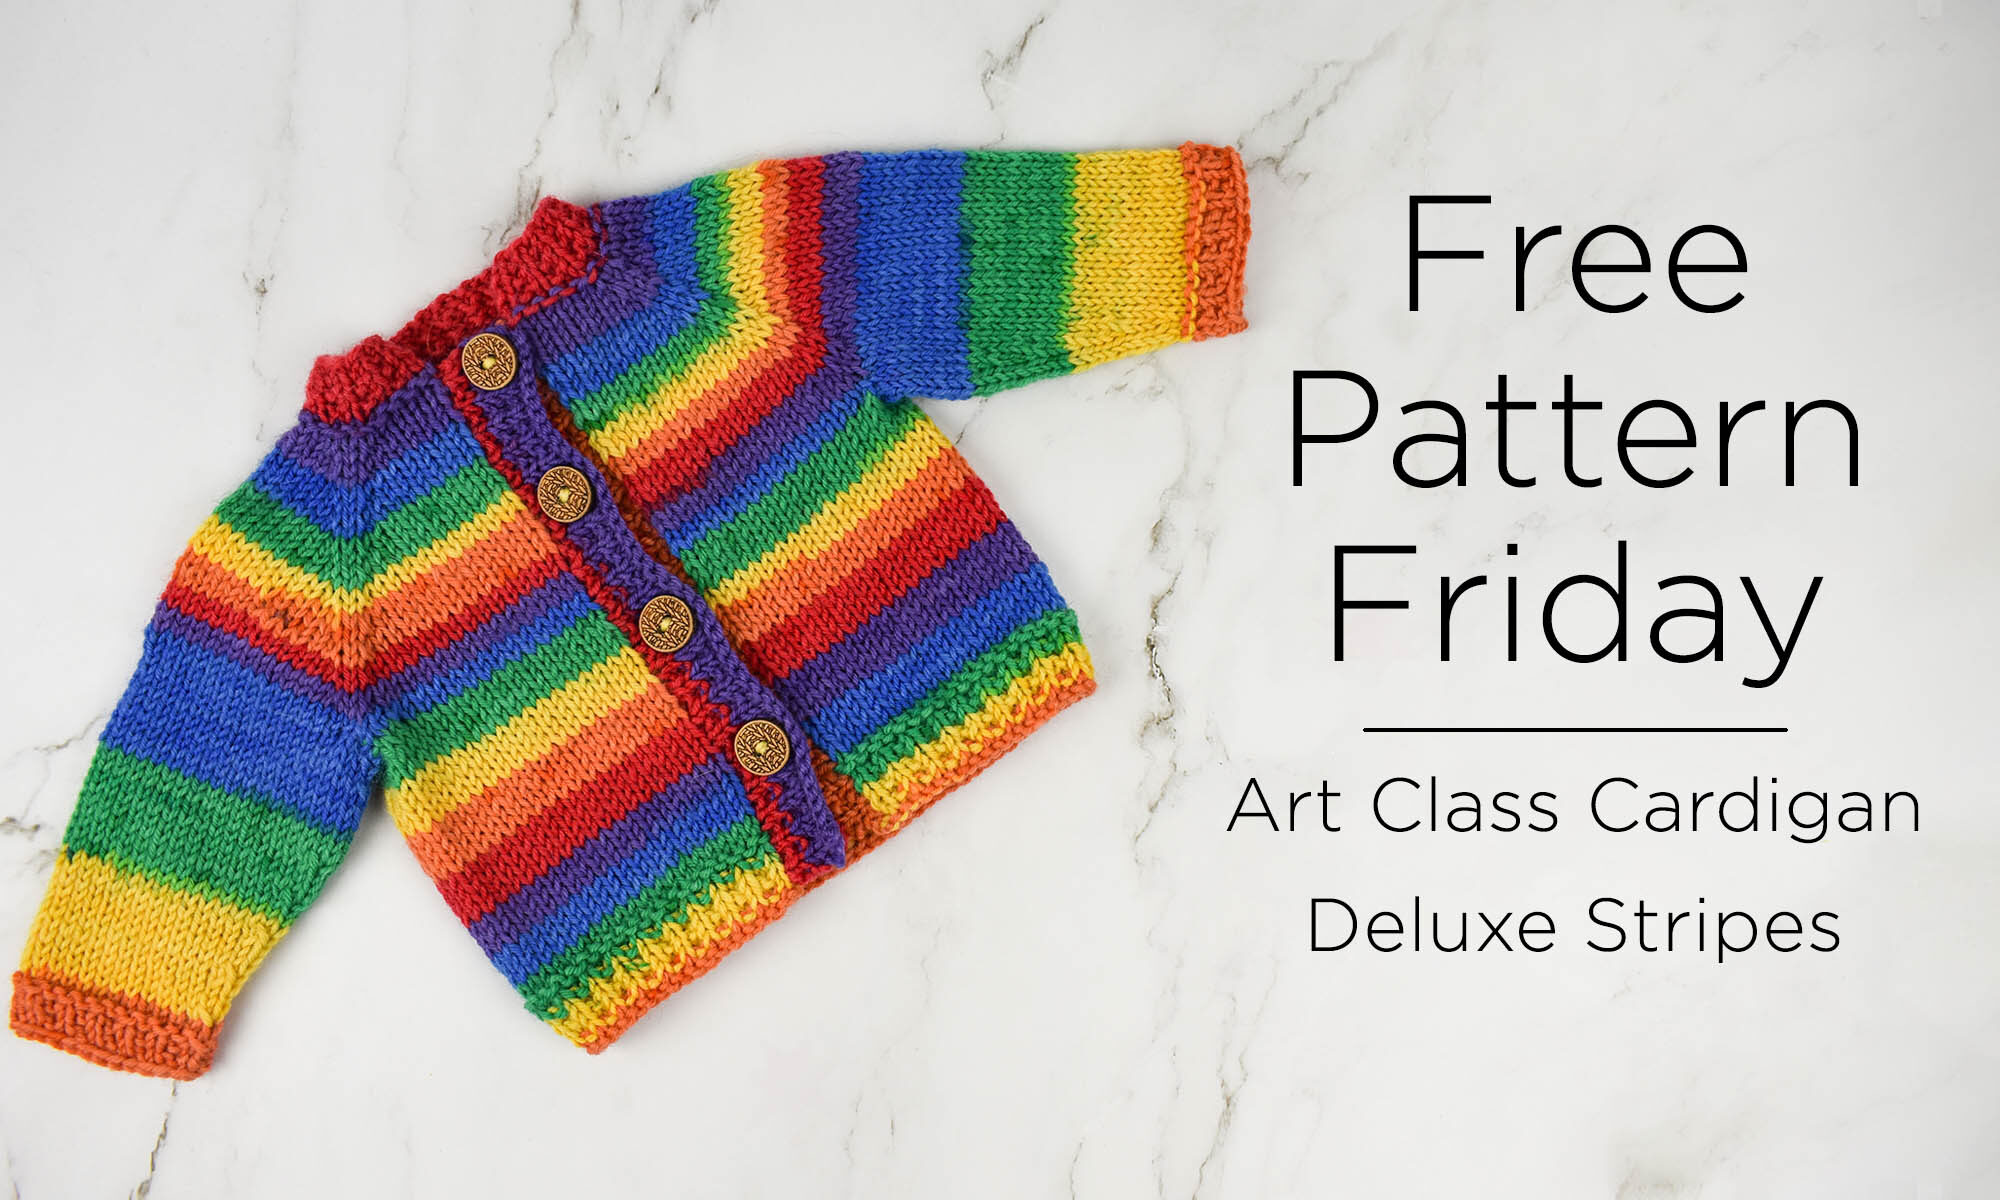 Colorful baby sweater. Text reads Free Pattern Friday. Art Class Cardigan knitted in Deluxe Stripes yarn